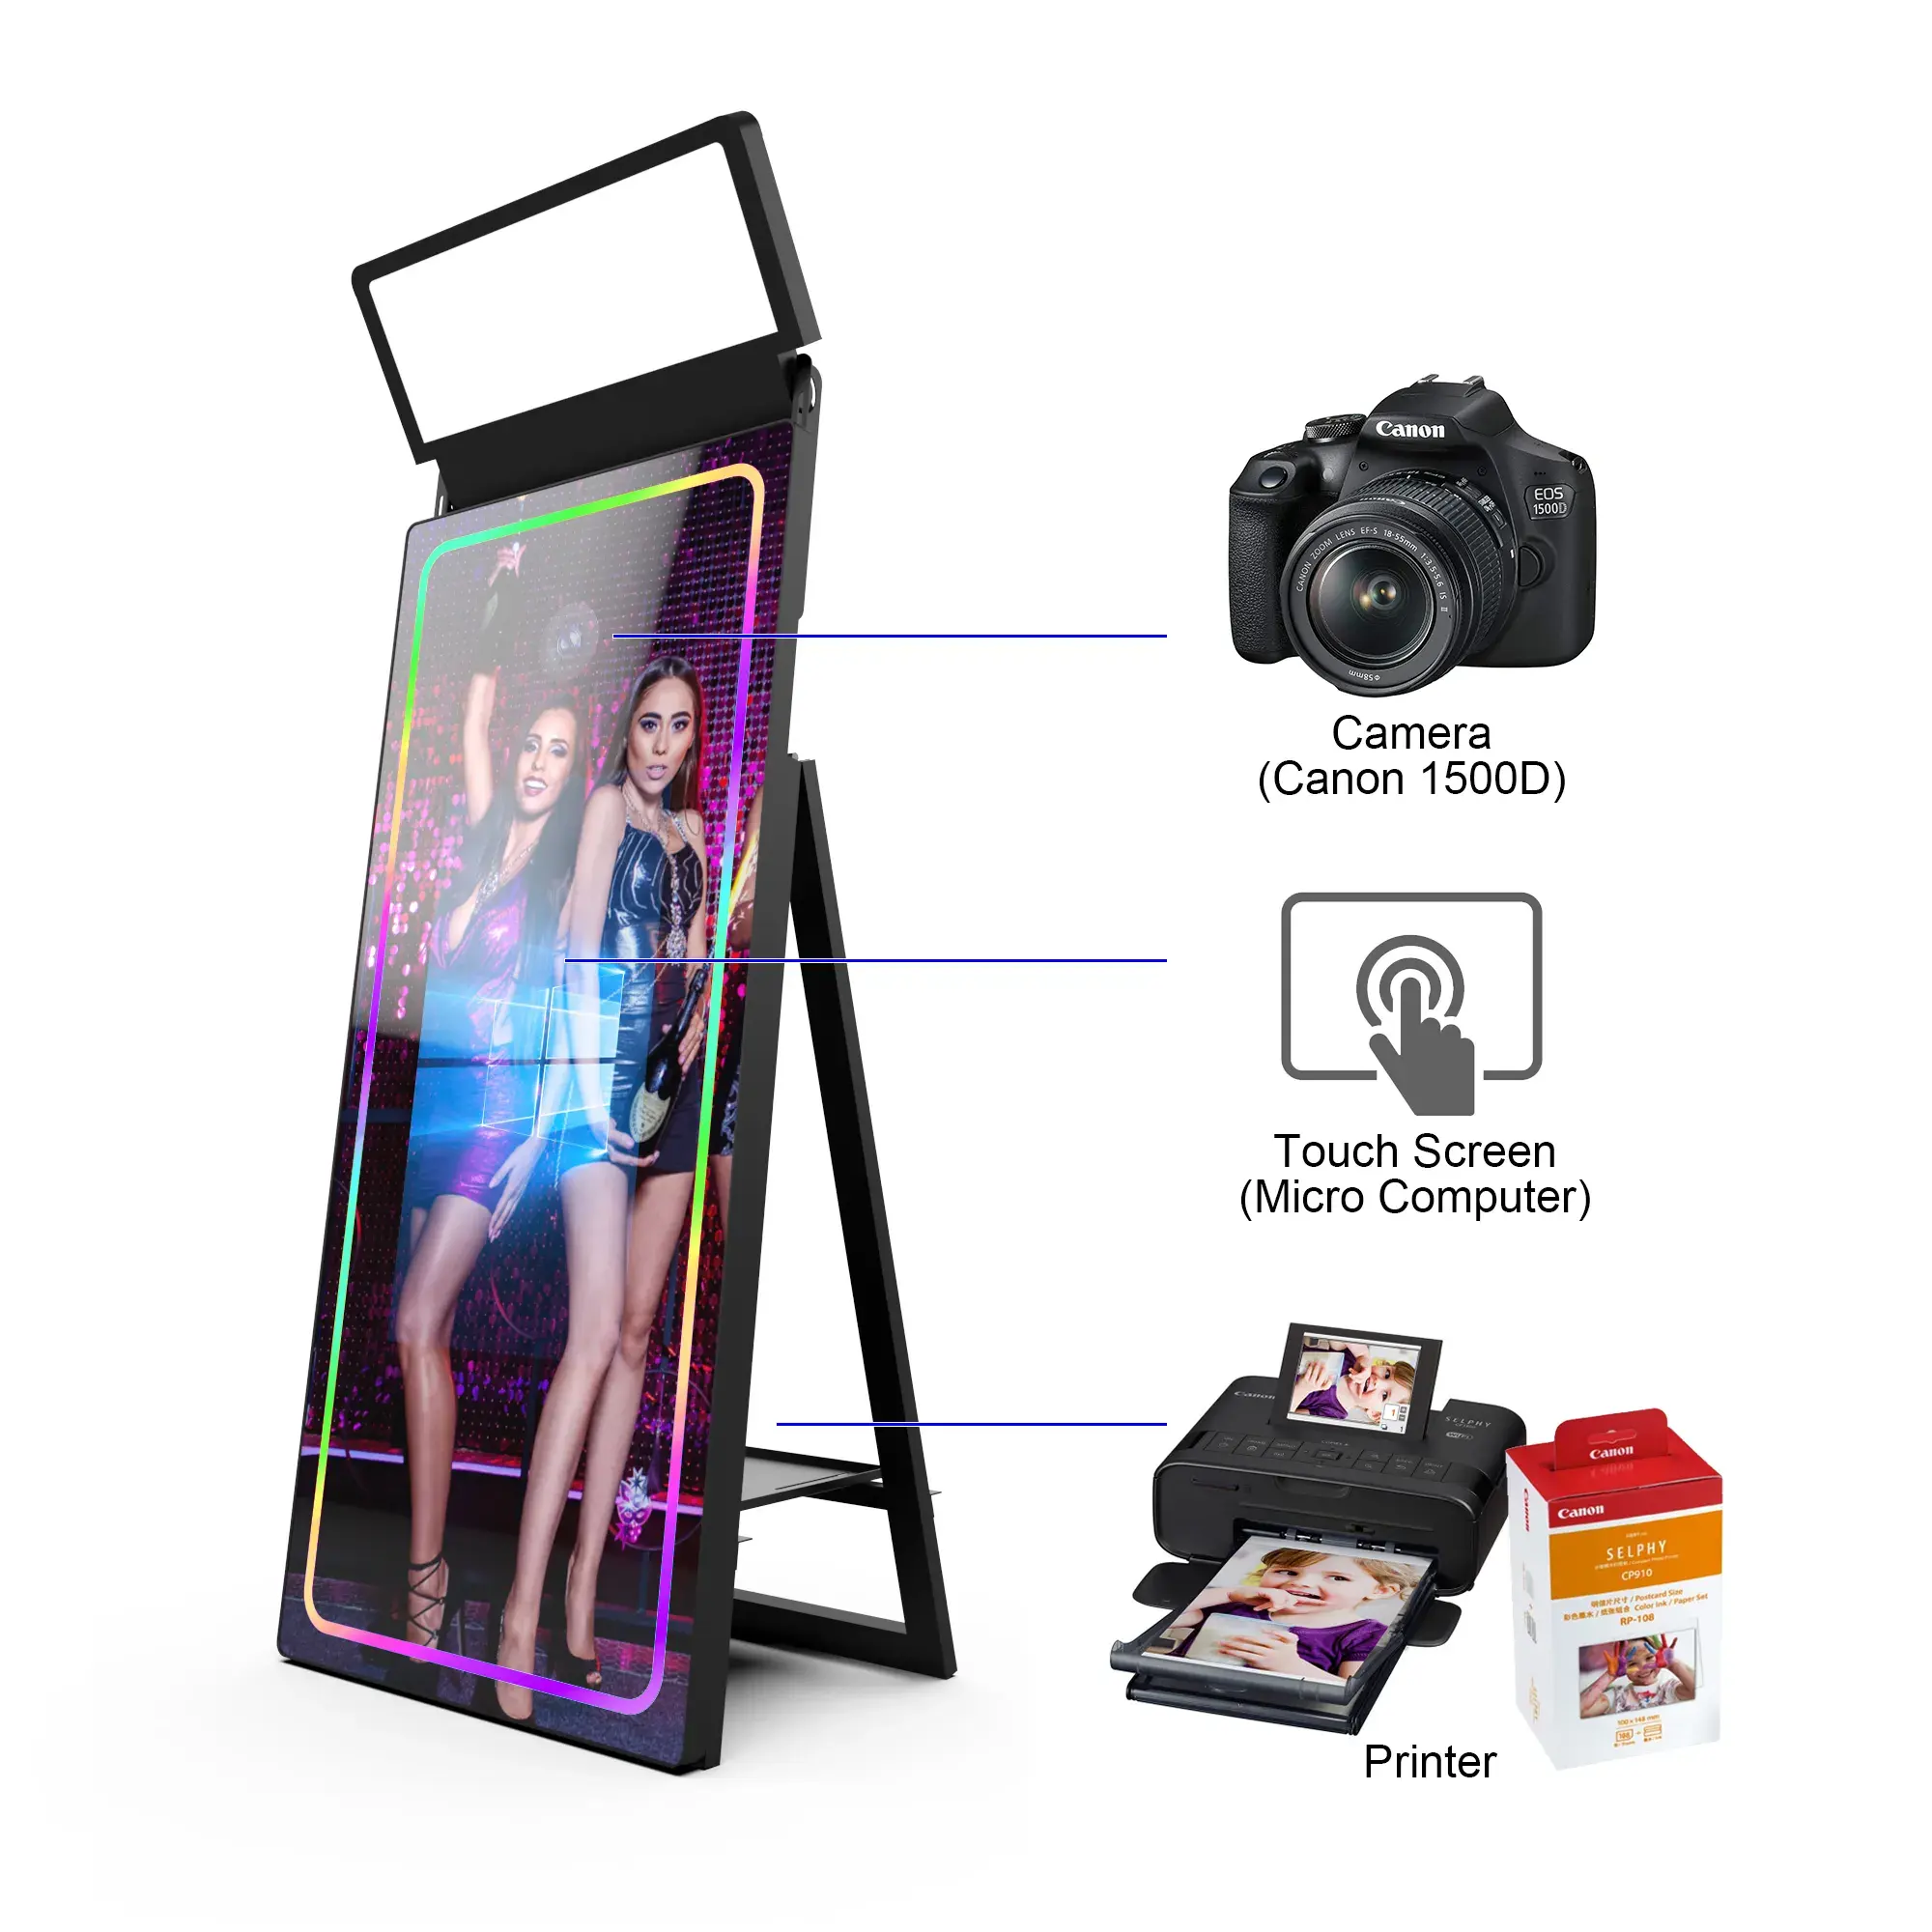 Selfie Magic Mirror Vogue Reality Wedding Photo Booth Kiosk with LED Frame and Printer Compatible with Cameras and Smartphones